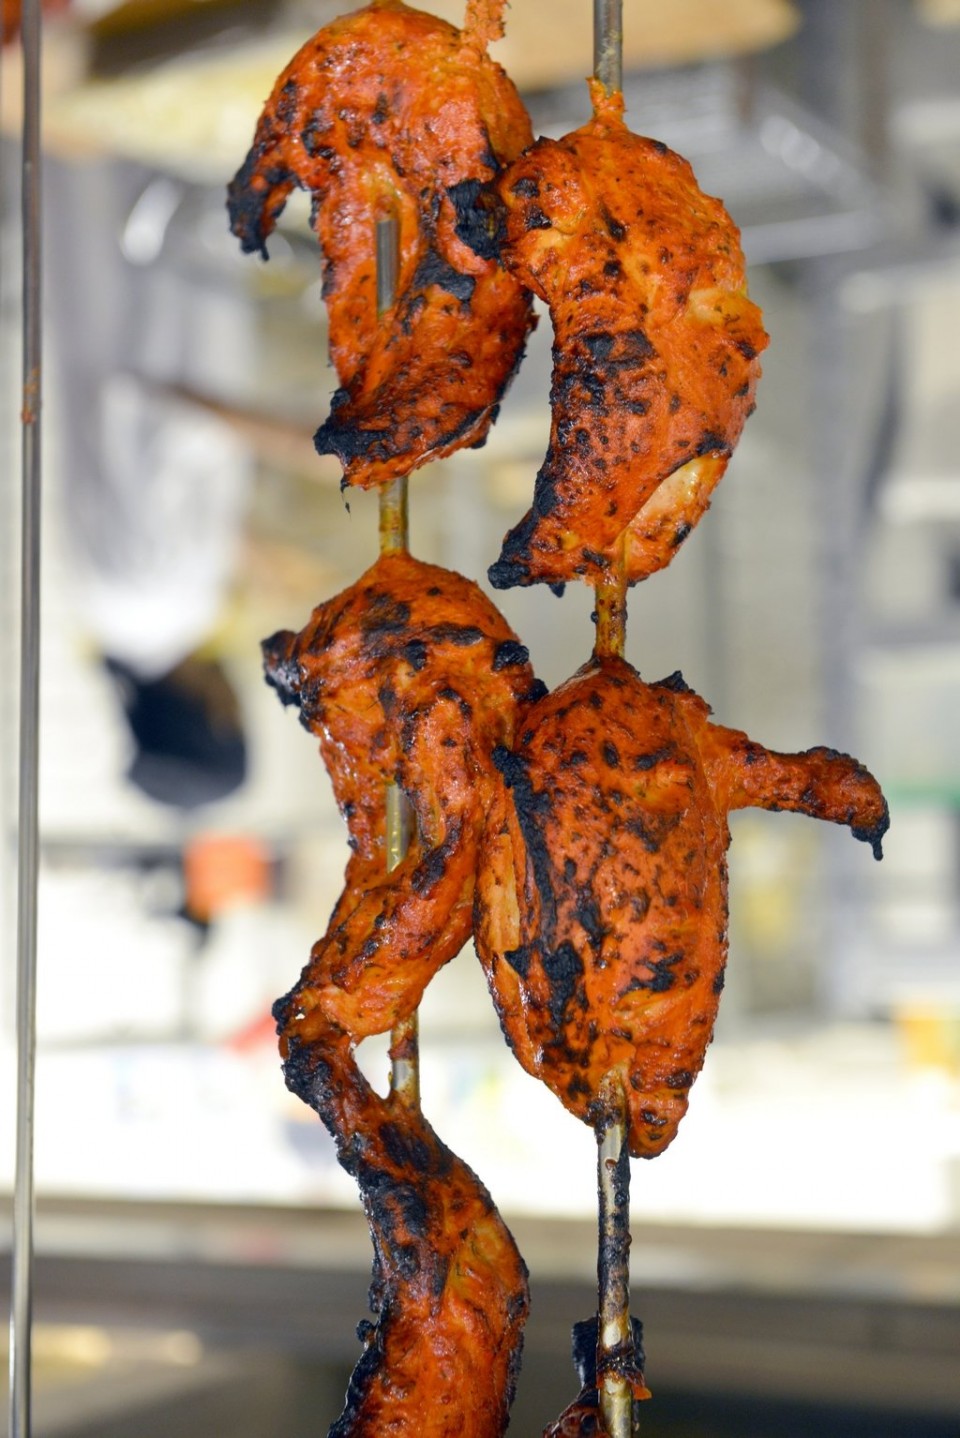 Chicken on the bone marinated with Indian spices, yogurt, ginger, garlic and grilled in the tandoor